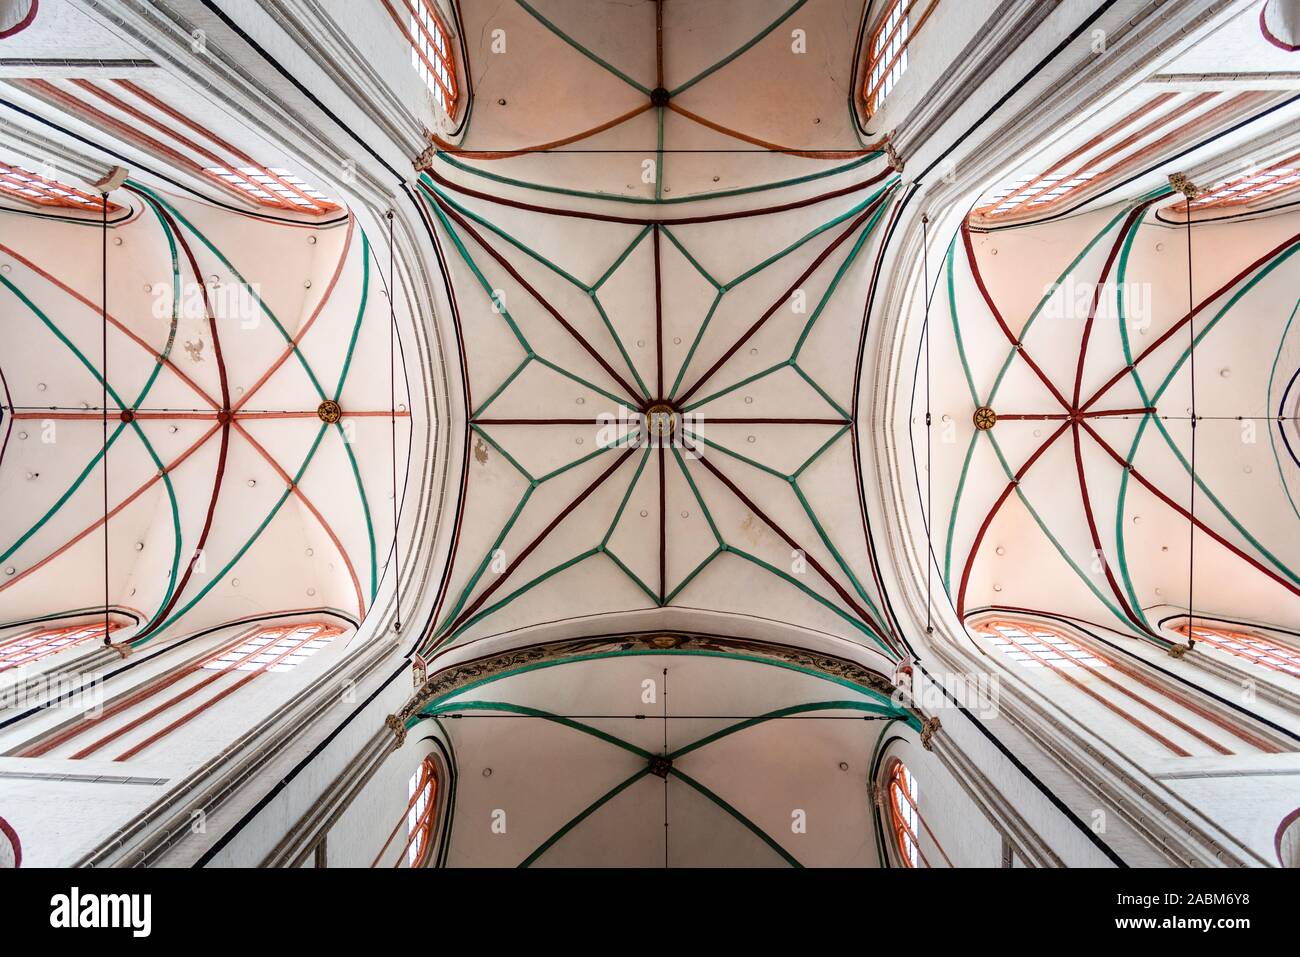 Schwerin, Germany - August 2, 2019: Interior view of Cathedral. Directly below view of the crossing. It is an Evangelical Lutheran Cathedral dedicated Stock Photo